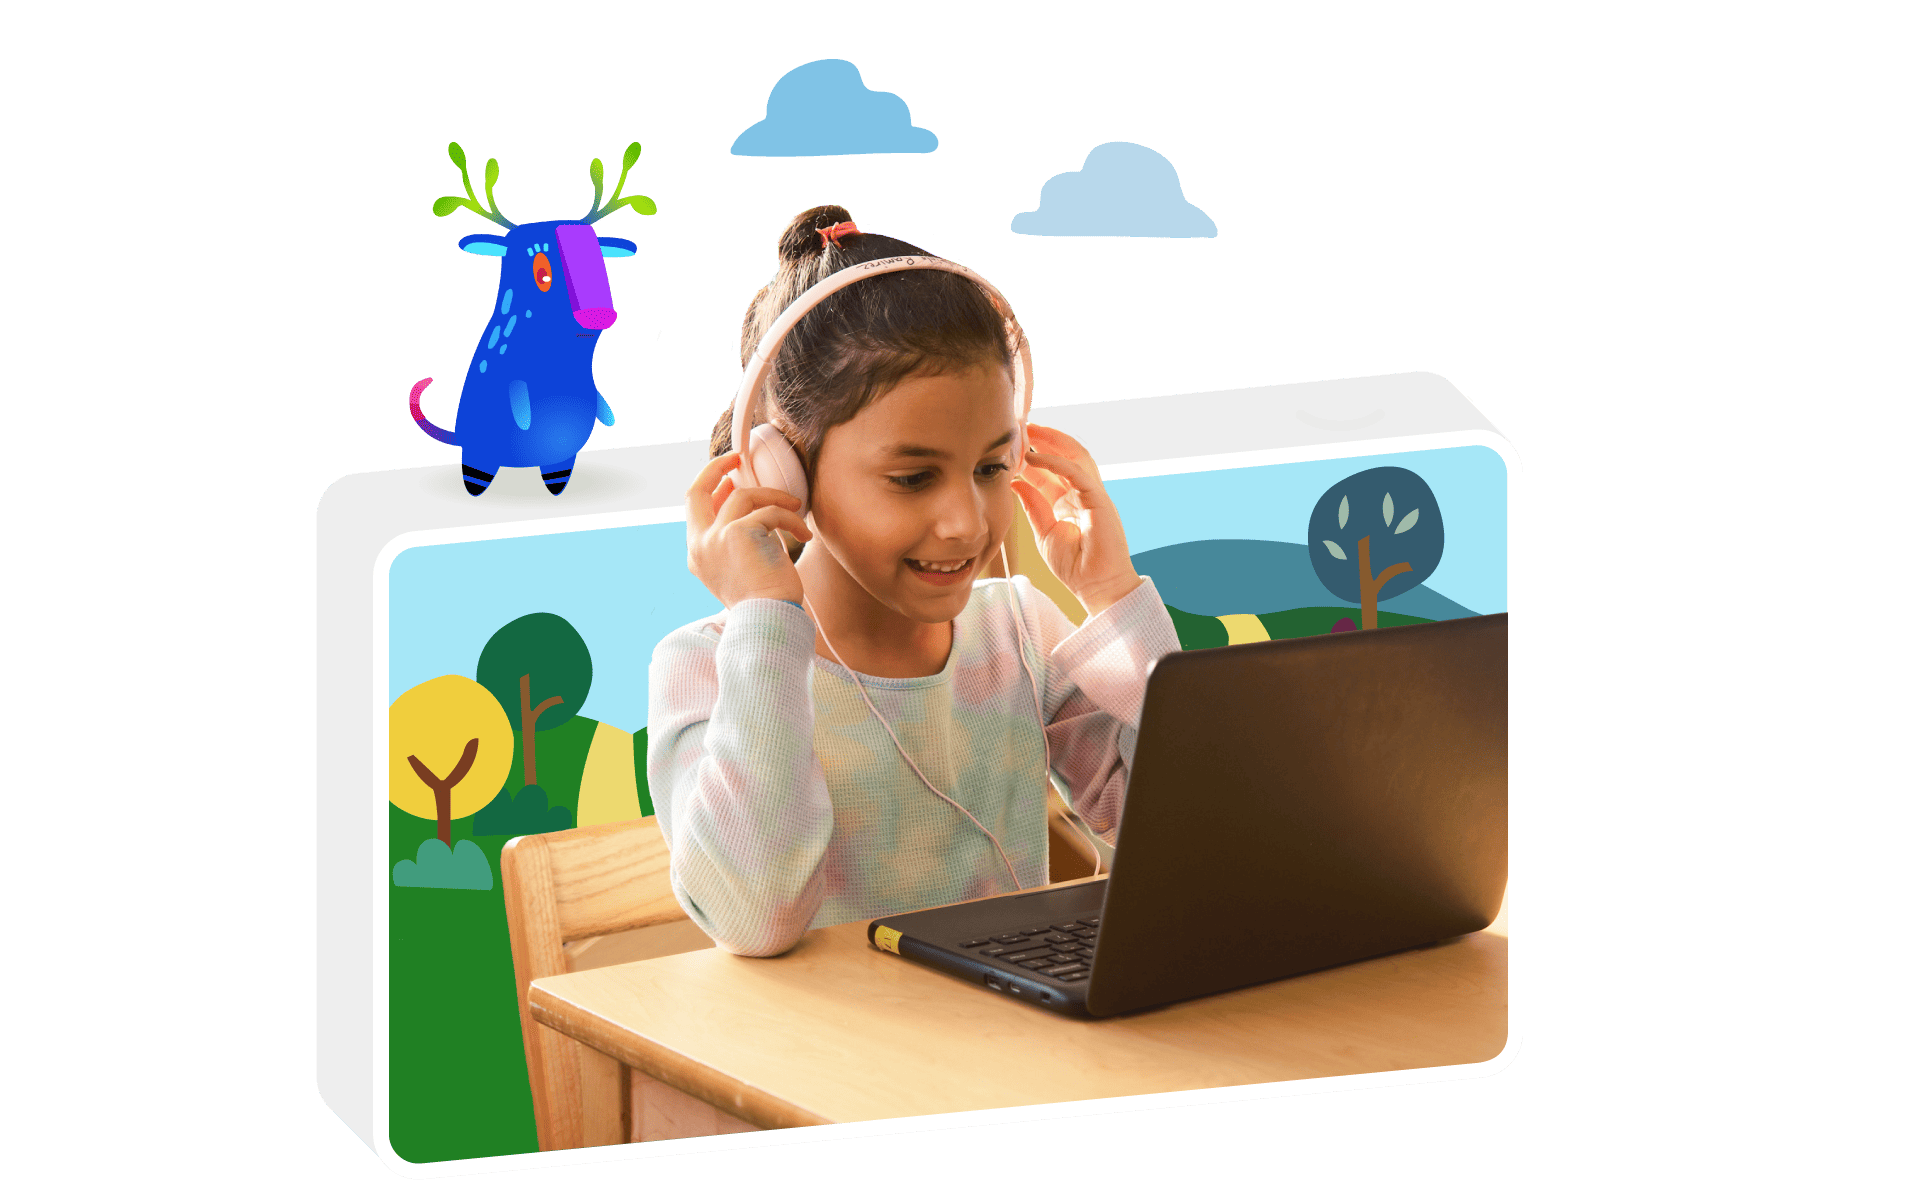 Young girl with headphones using a laptop at a desk to boost reading skills, with a whimsical illustration of a blue creature and trees in the background.